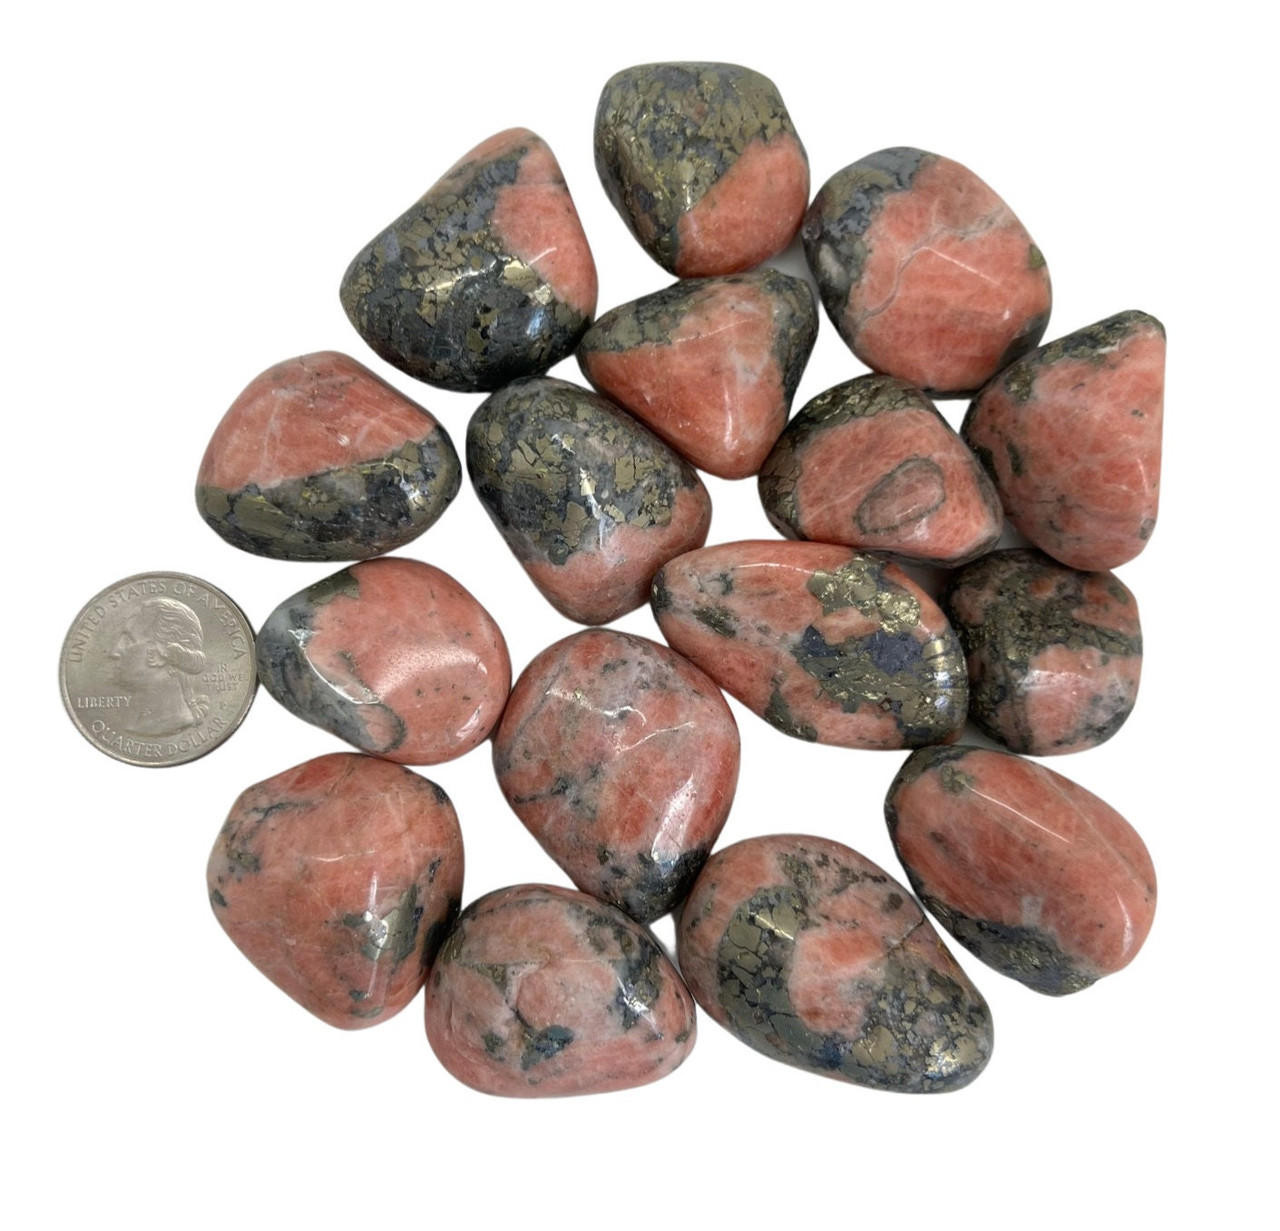 Triplite: Meaning, Properties, and Benefits You Should Know